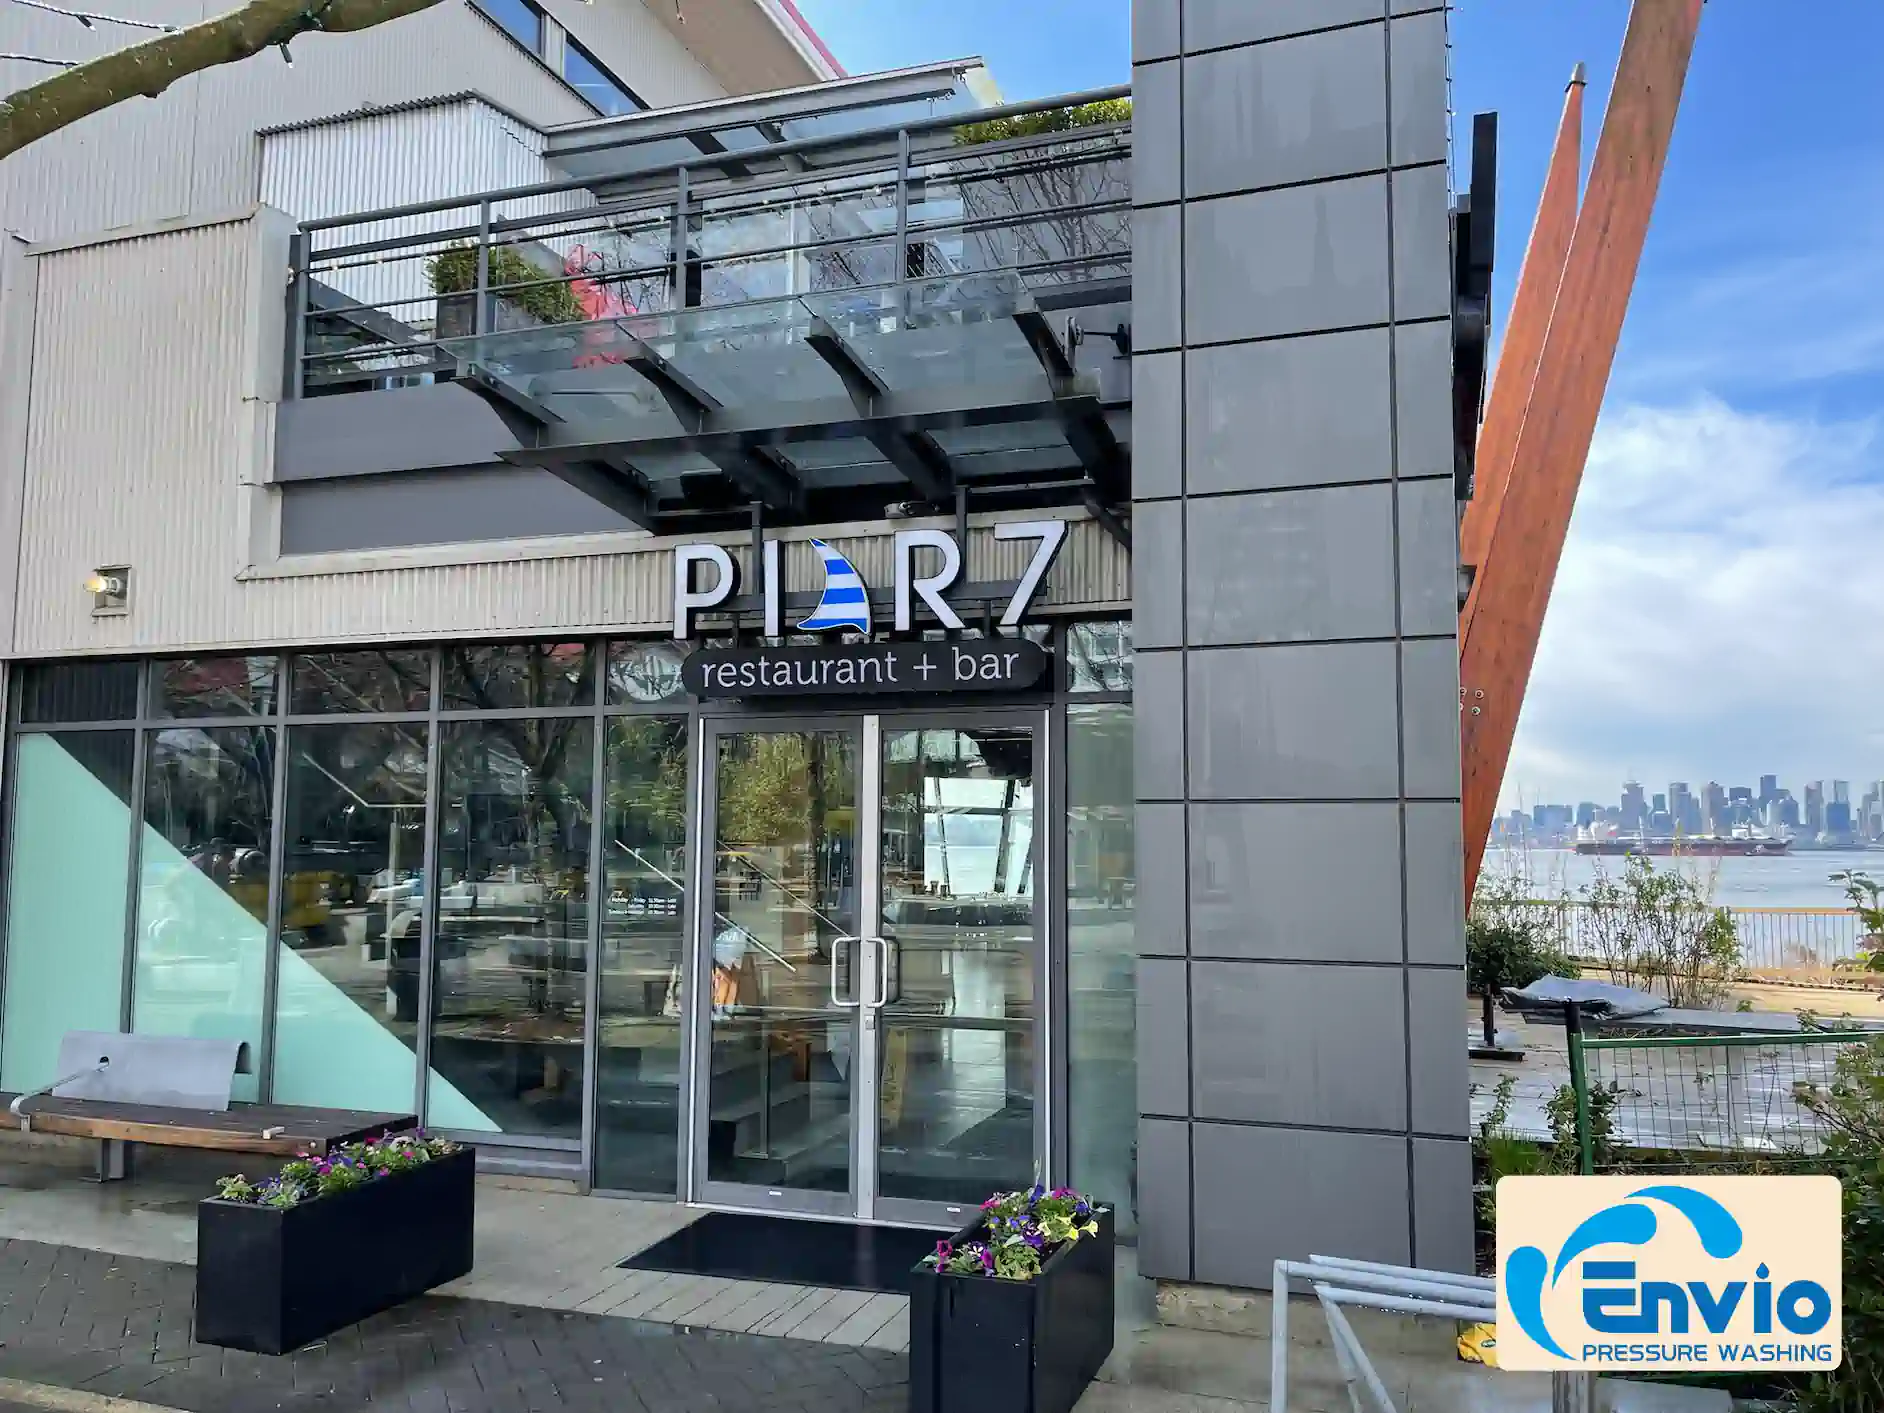 Pier7 resturant exterior cleaning after